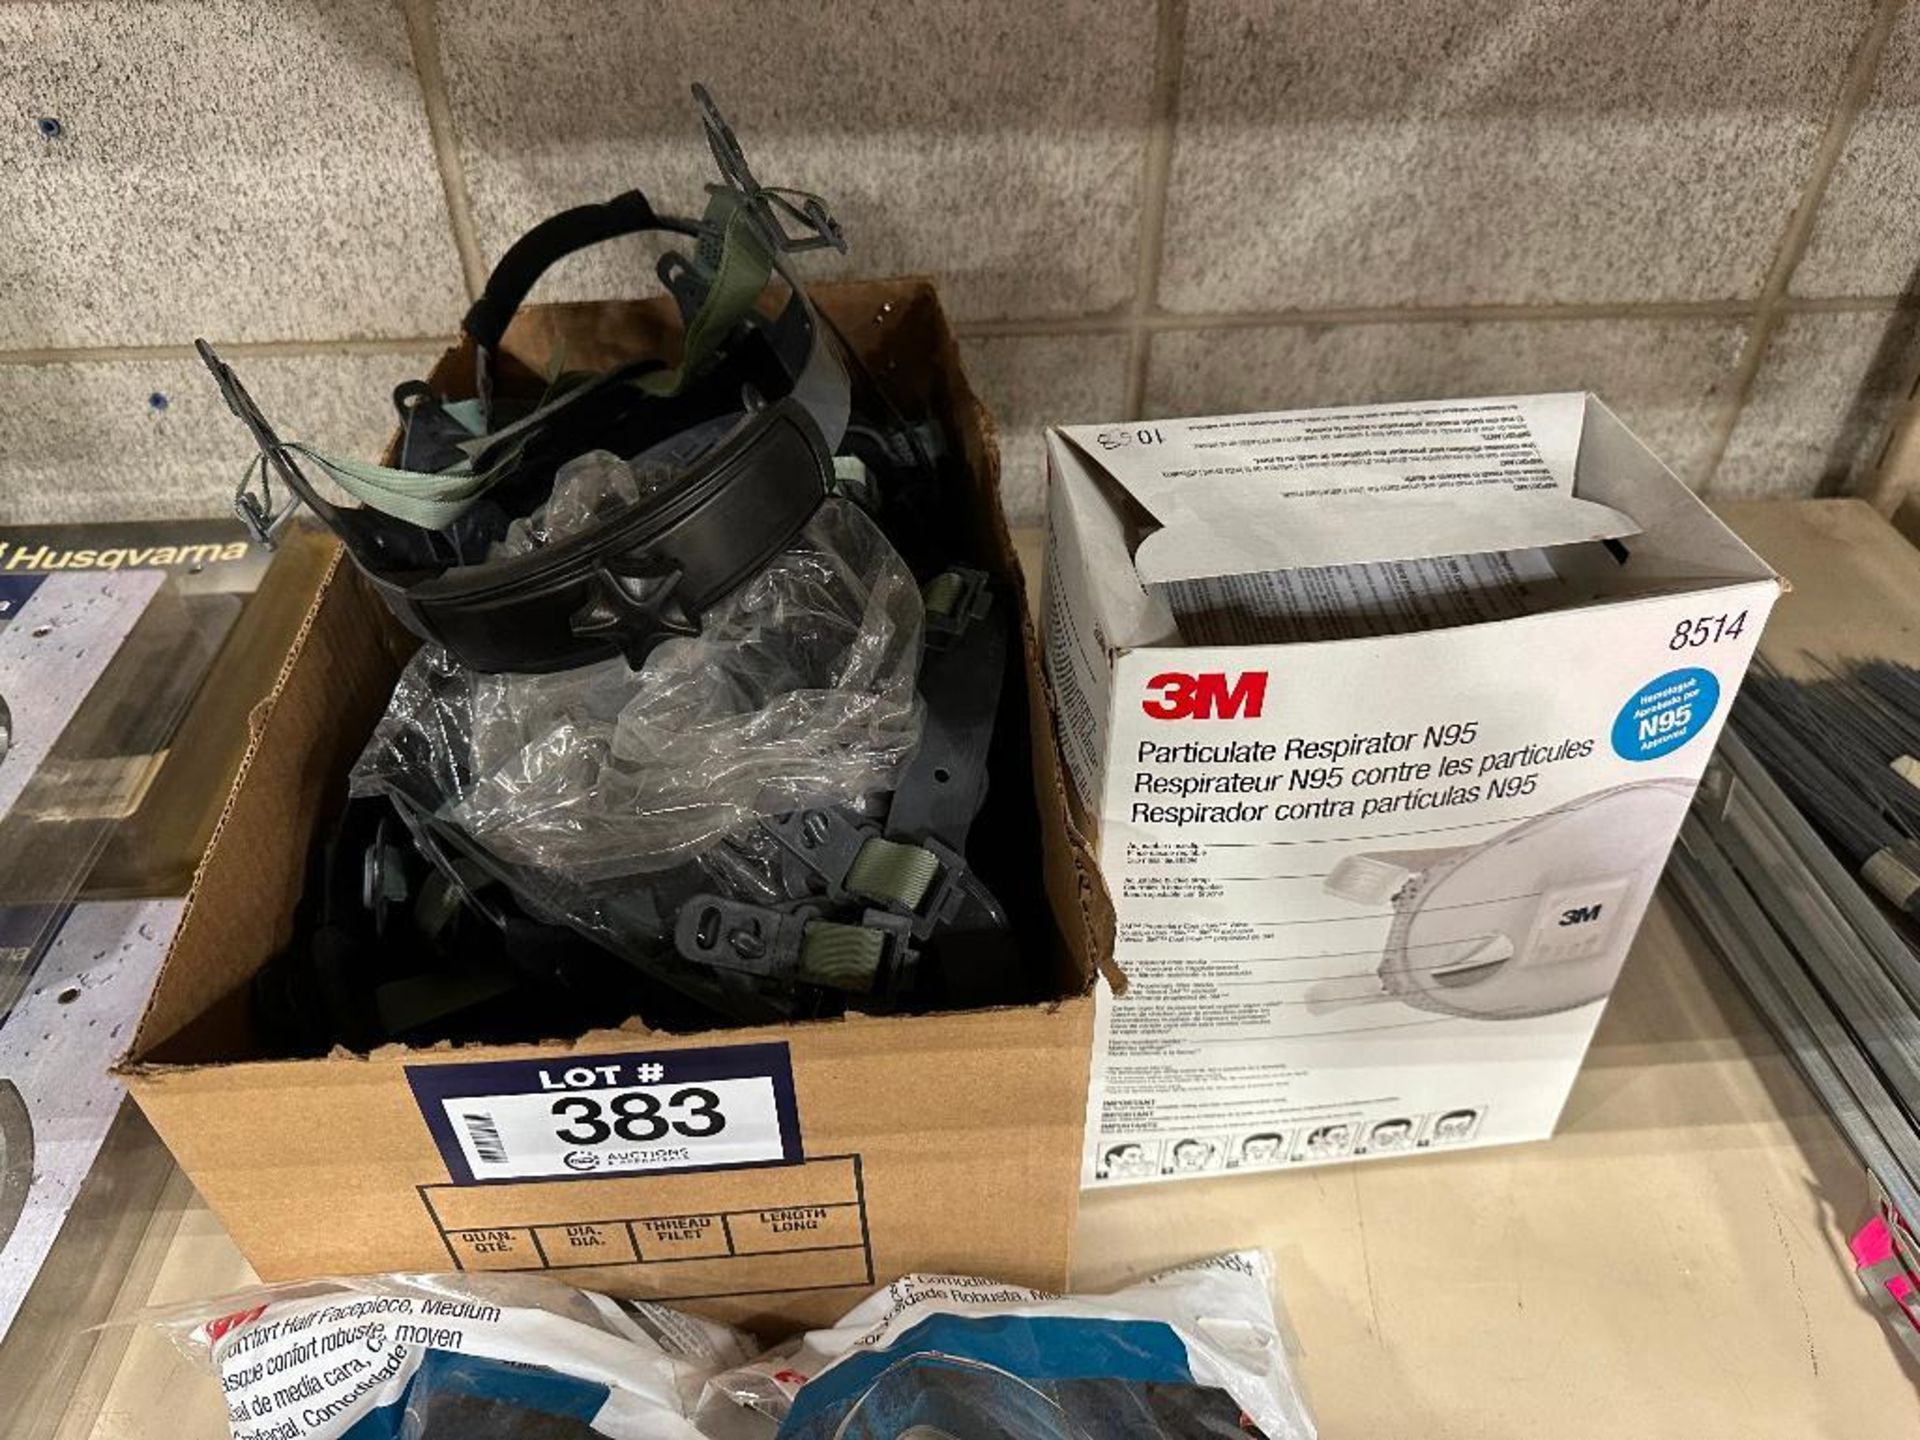 Lot of Asst. N95 Particulate Respirators, (2) 3M Half Masks, Hard Hat Head Supports, etc. - Image 4 of 5